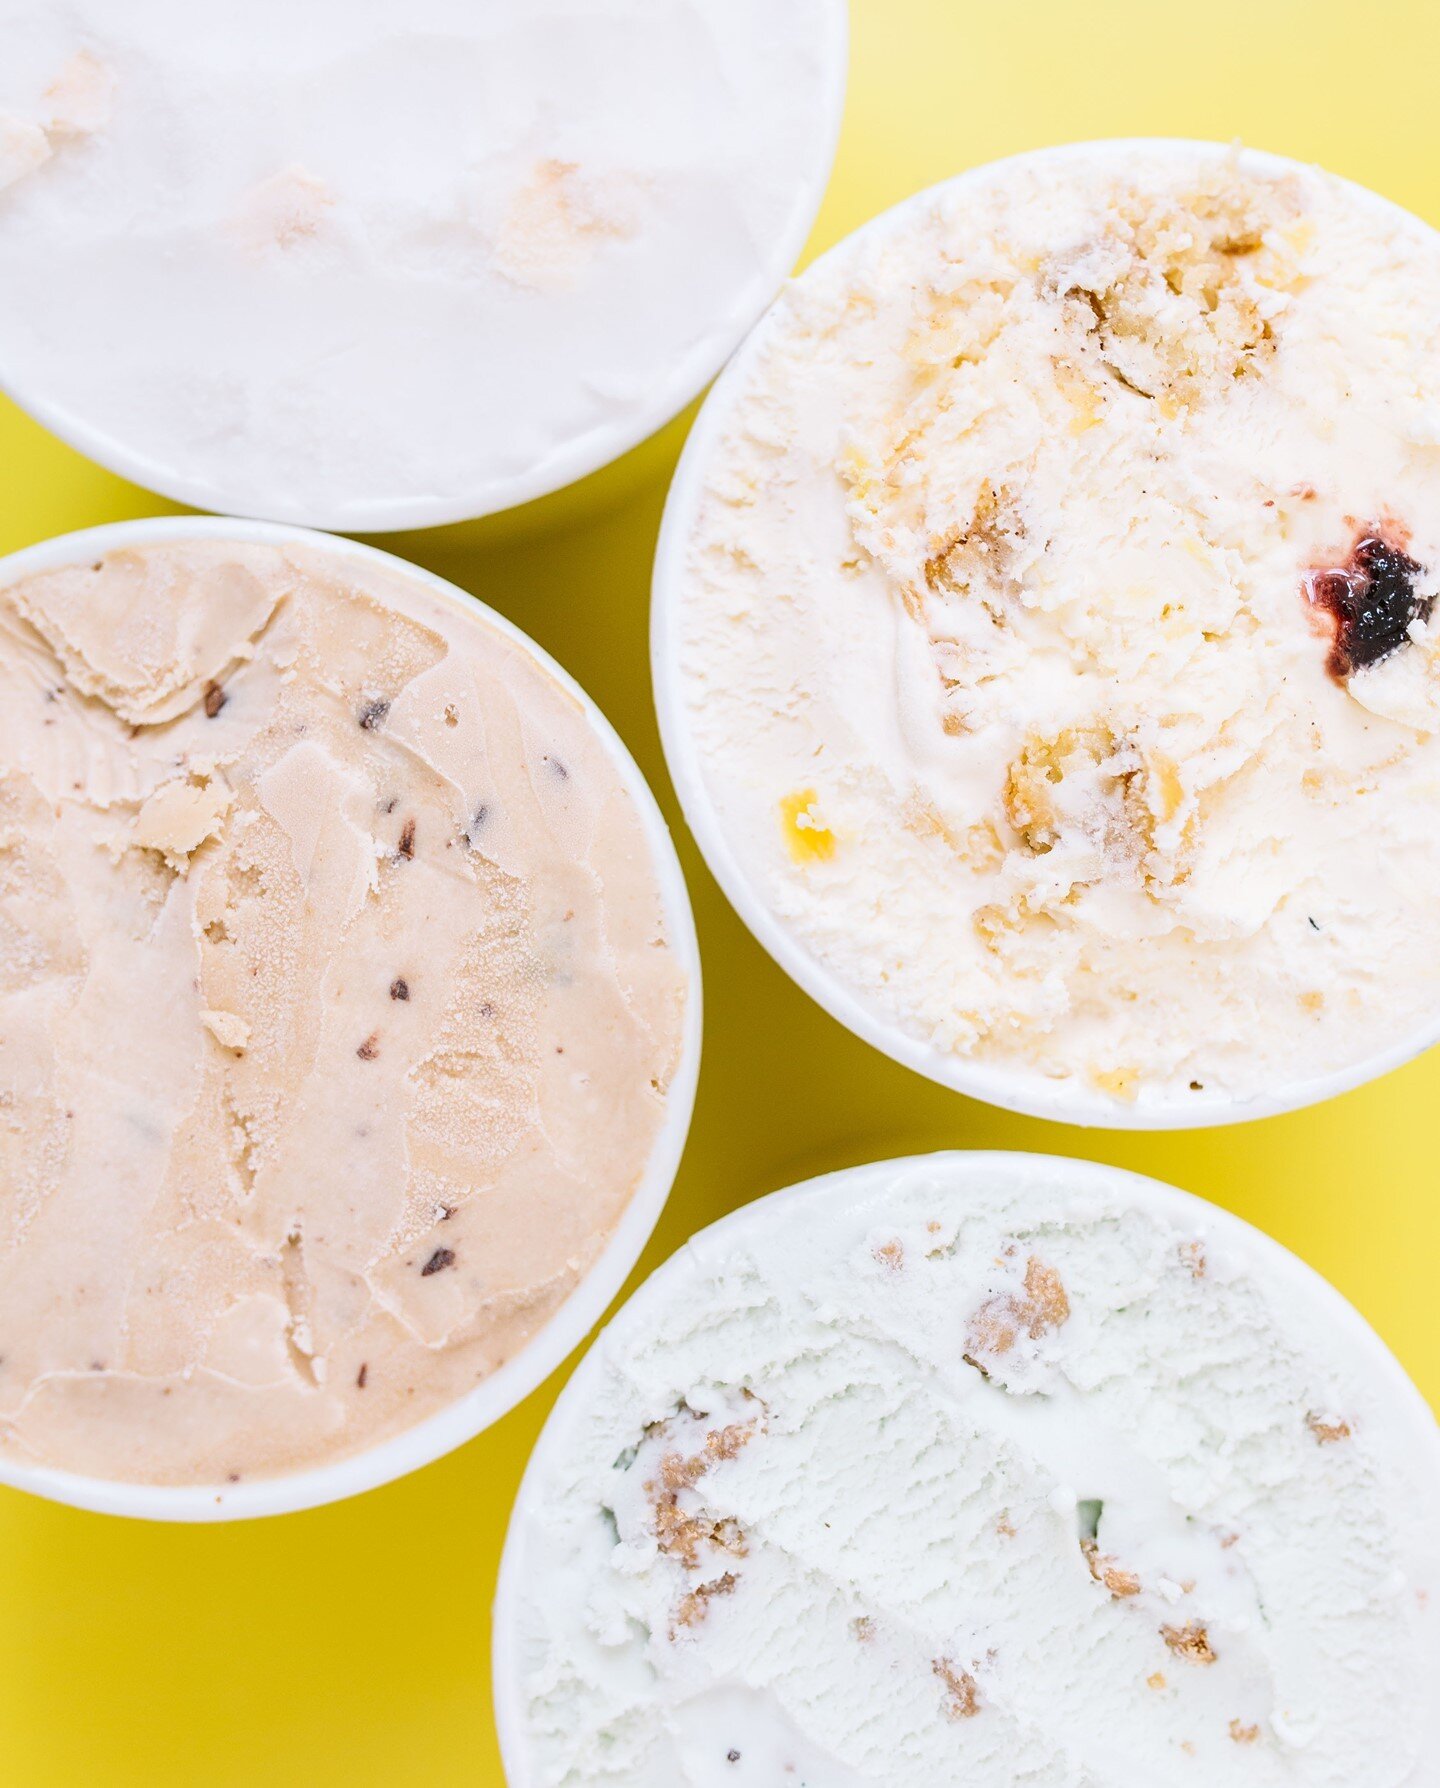 JOY 😍

Stocking up on happy pints of our sometimes flavors, which is your favorite this rotation?
.
.
.
.
.
#joy #happypints #icecreamforbreakfast #breakfastofchampions #changetheworld #melticecreams